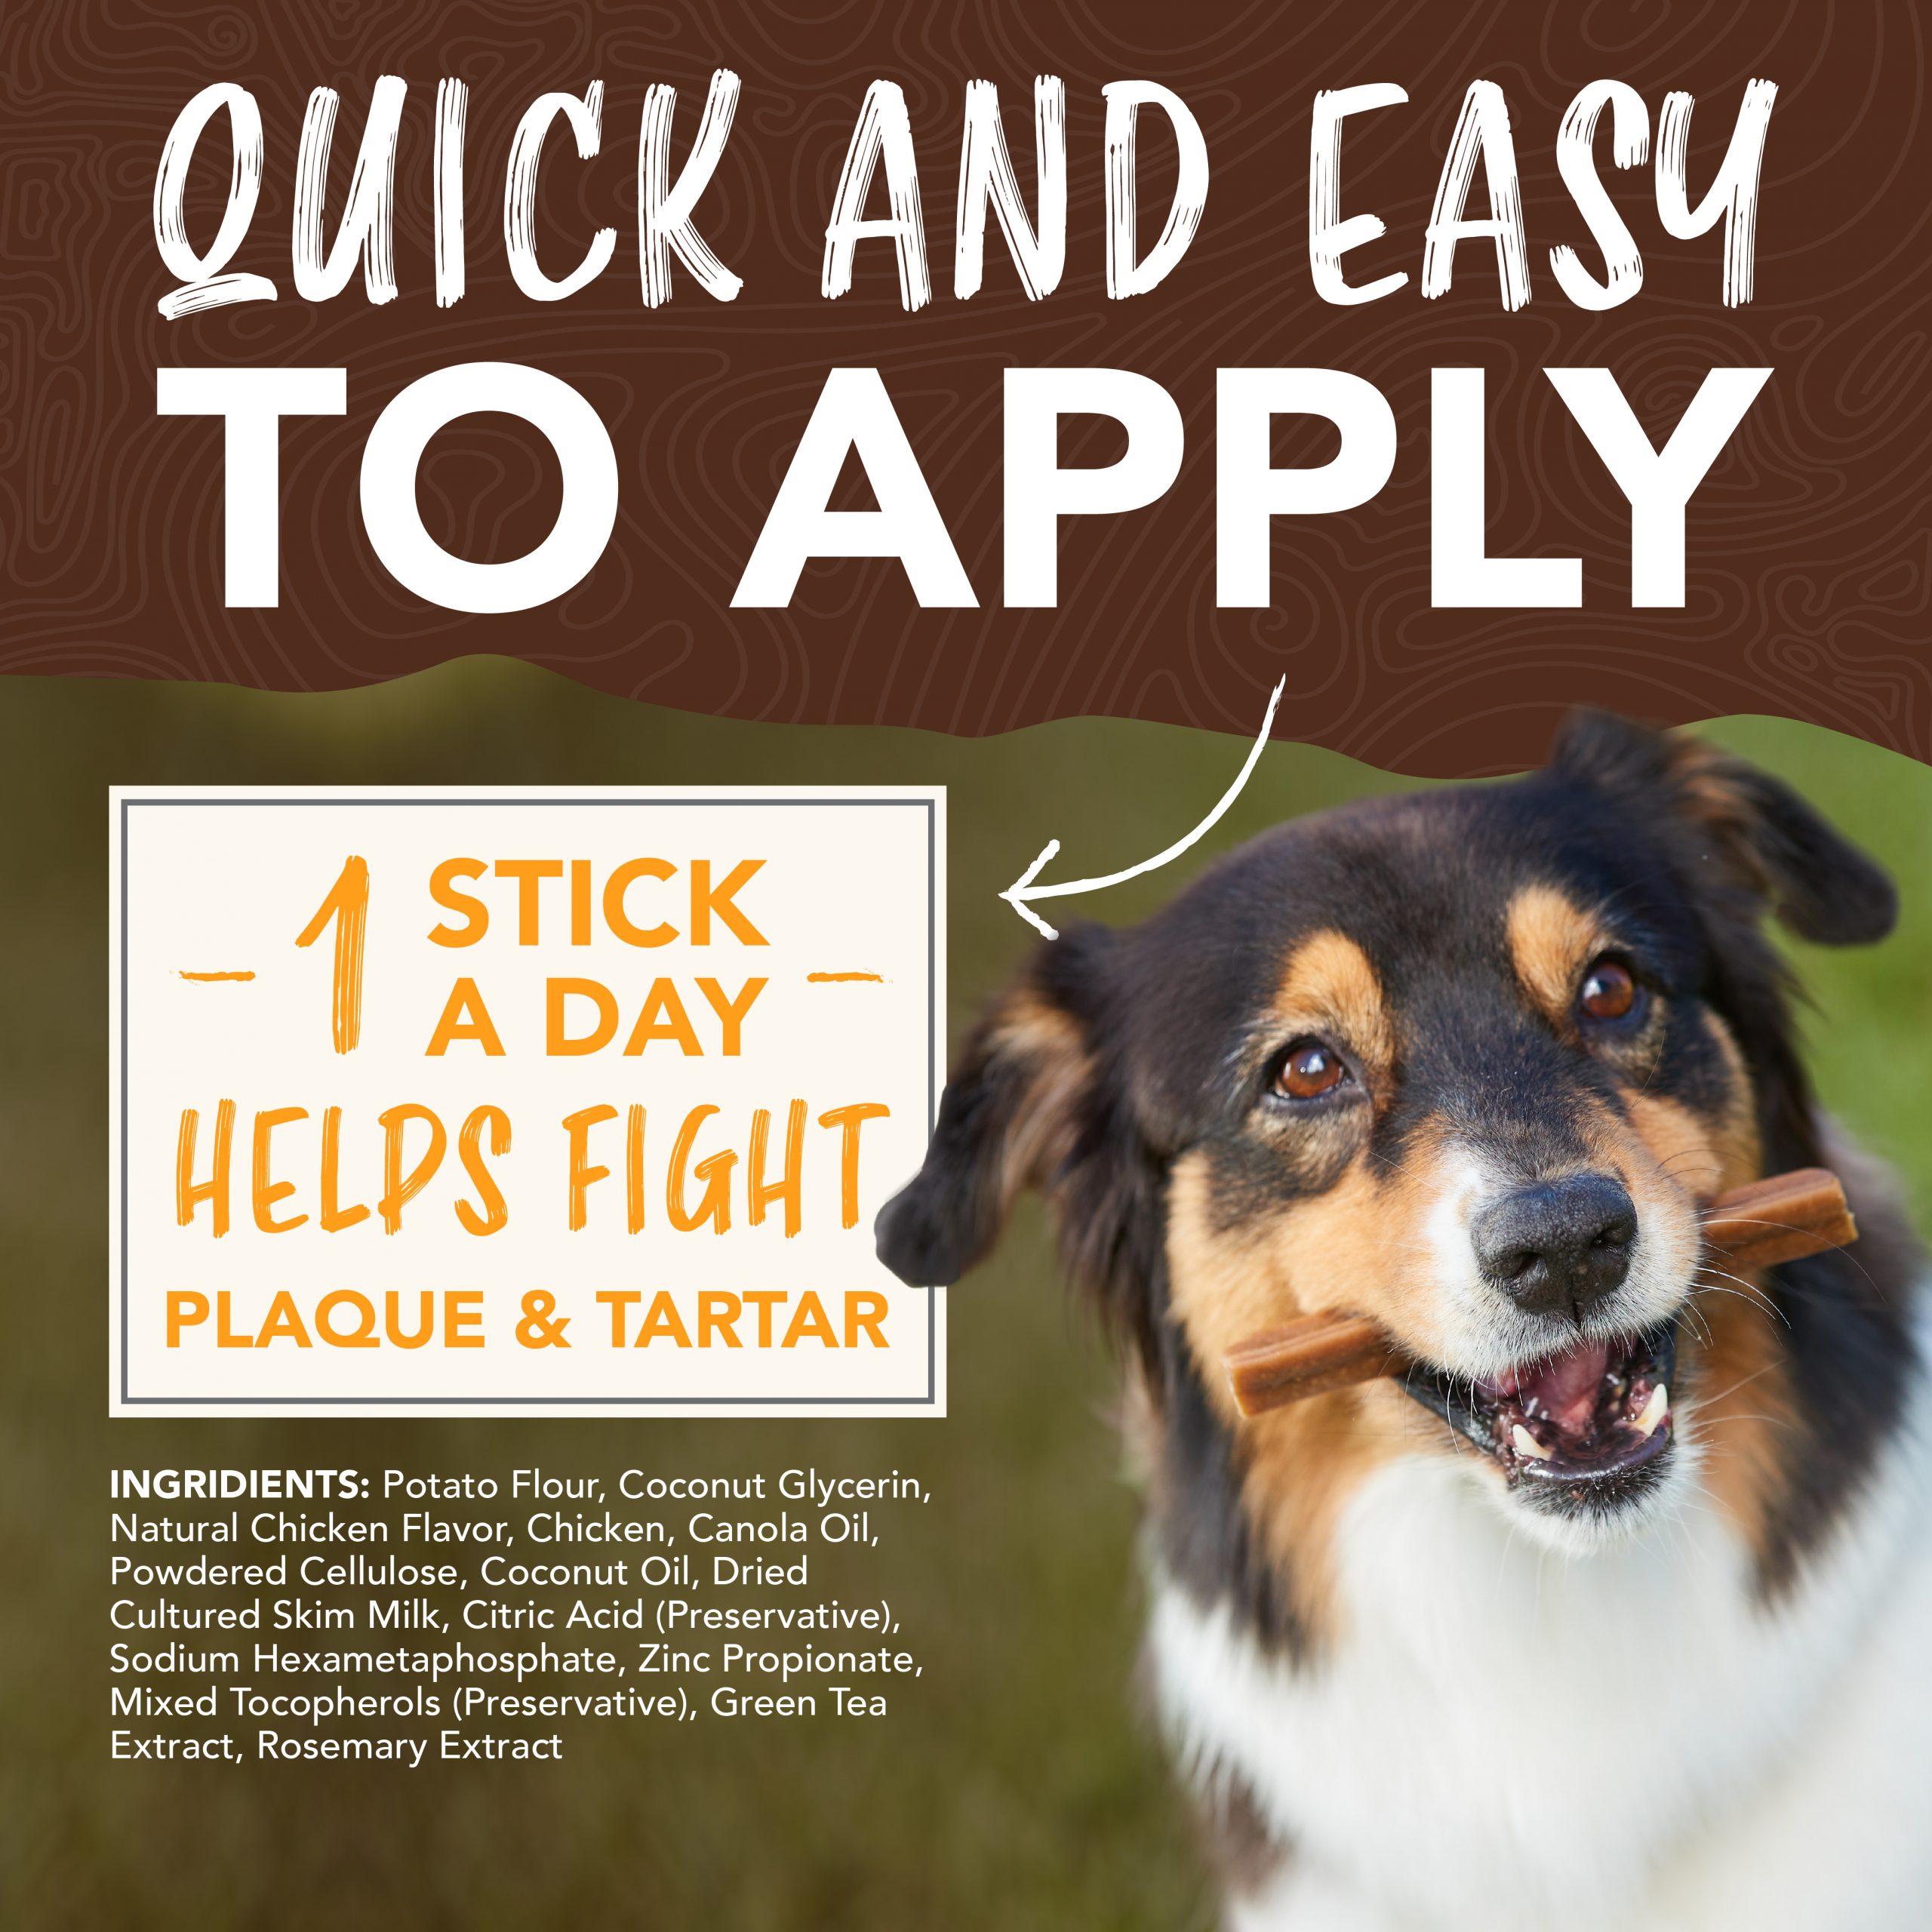 Teeth Cleaning Sticks for Dogs – Honey Marinated Chicken Flavor